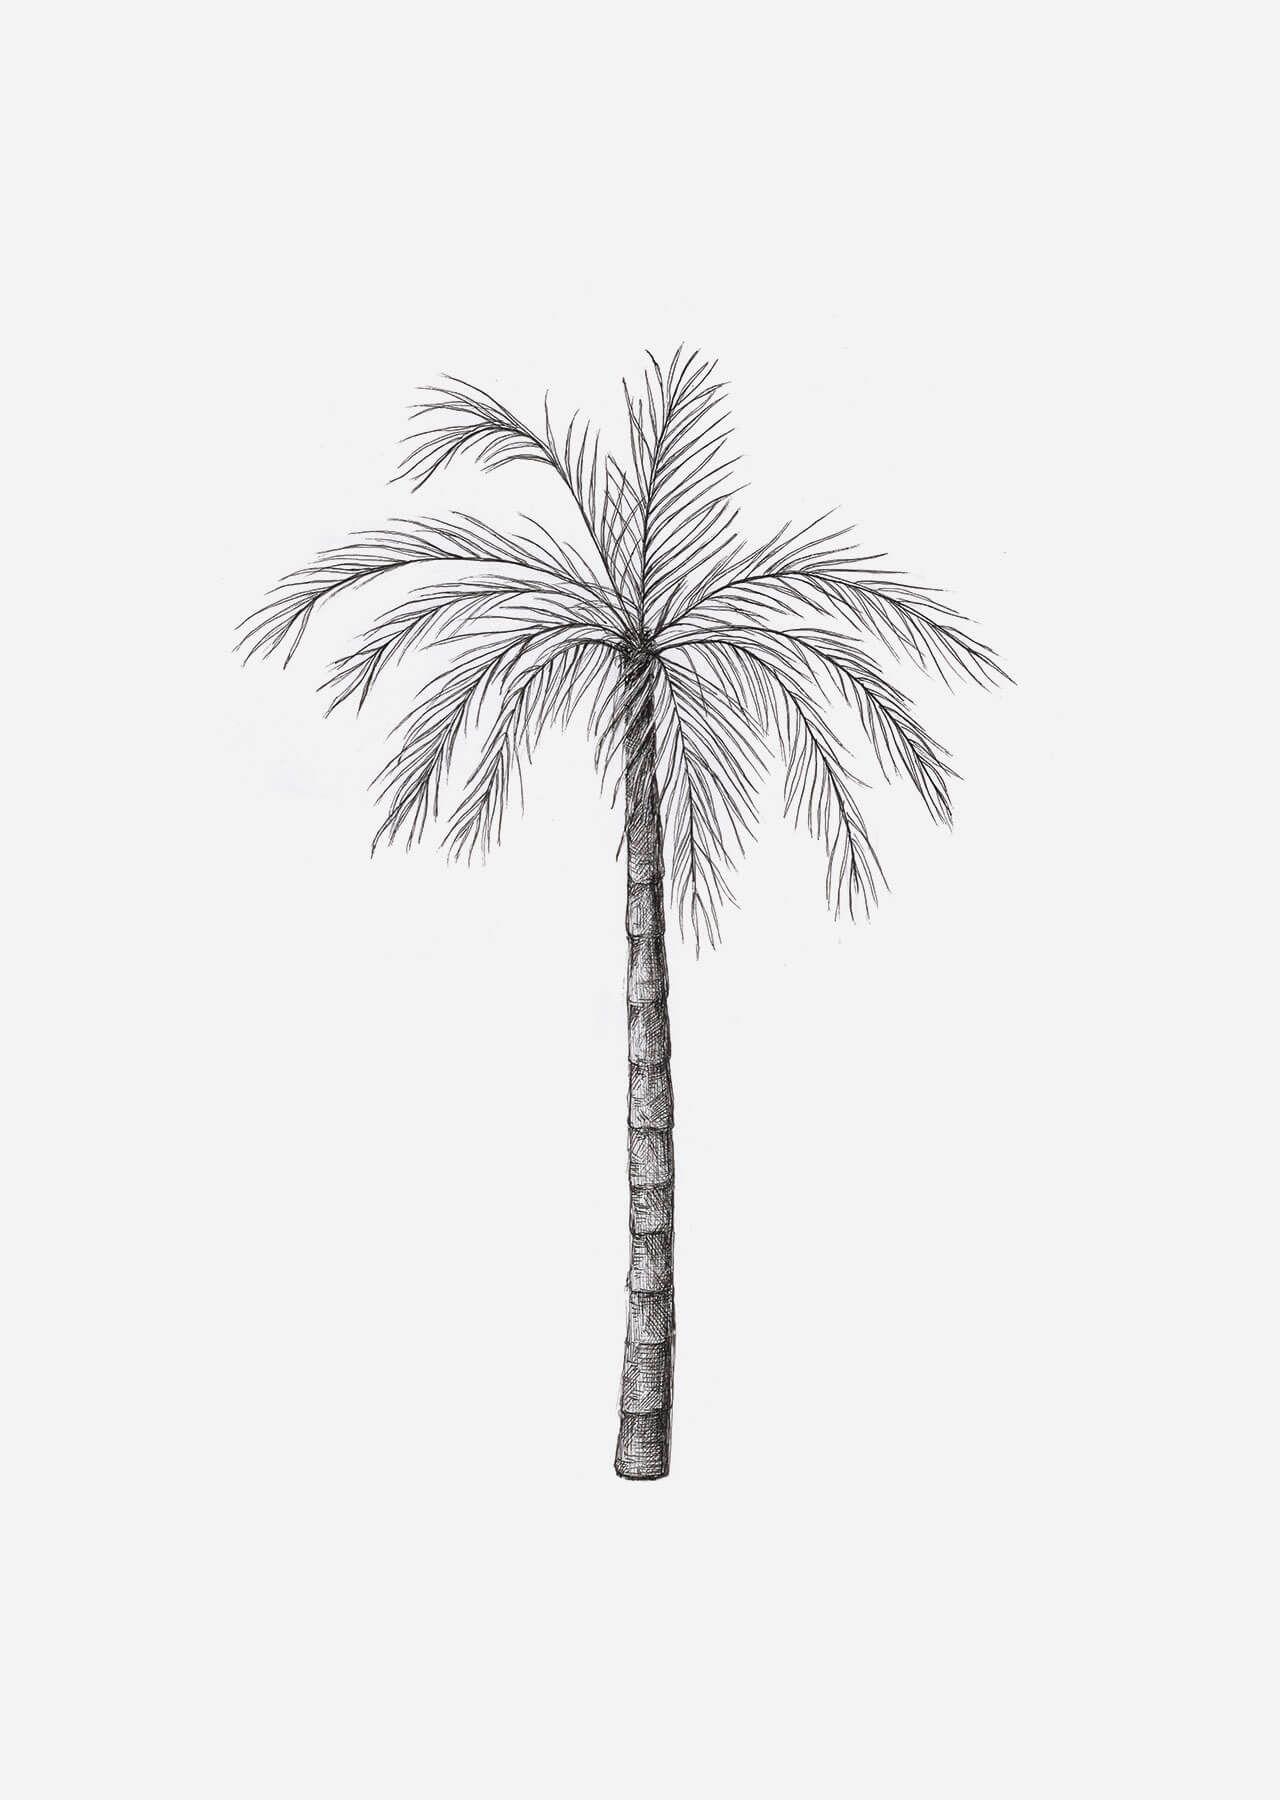 Palm Tree Drawing & Illustration Ideas - How To Draw Palm Tree